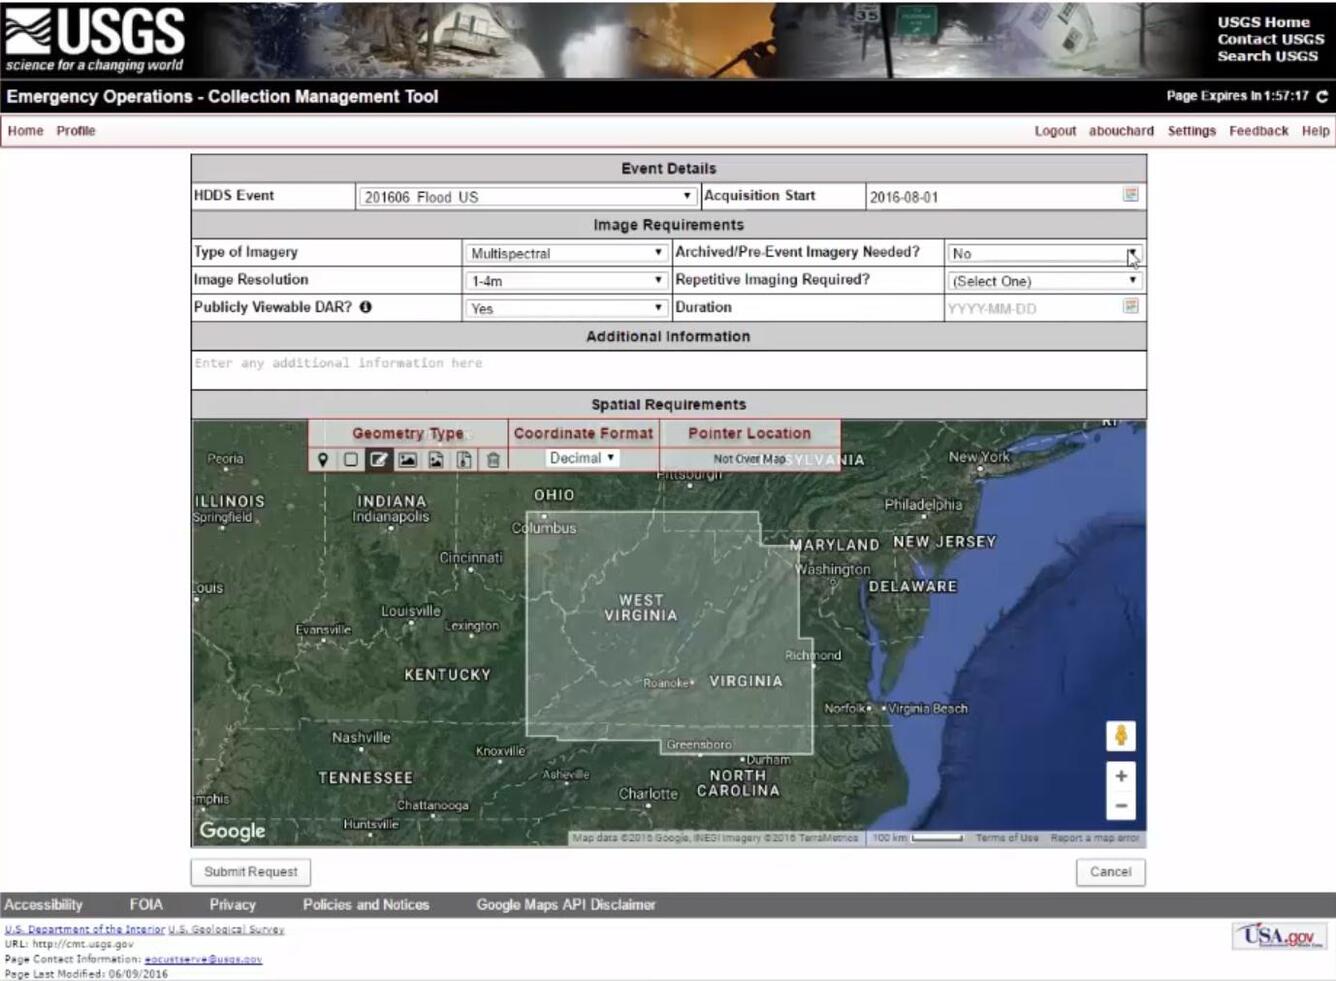 USGS Emergency Operations Collection Management Tool screen capture